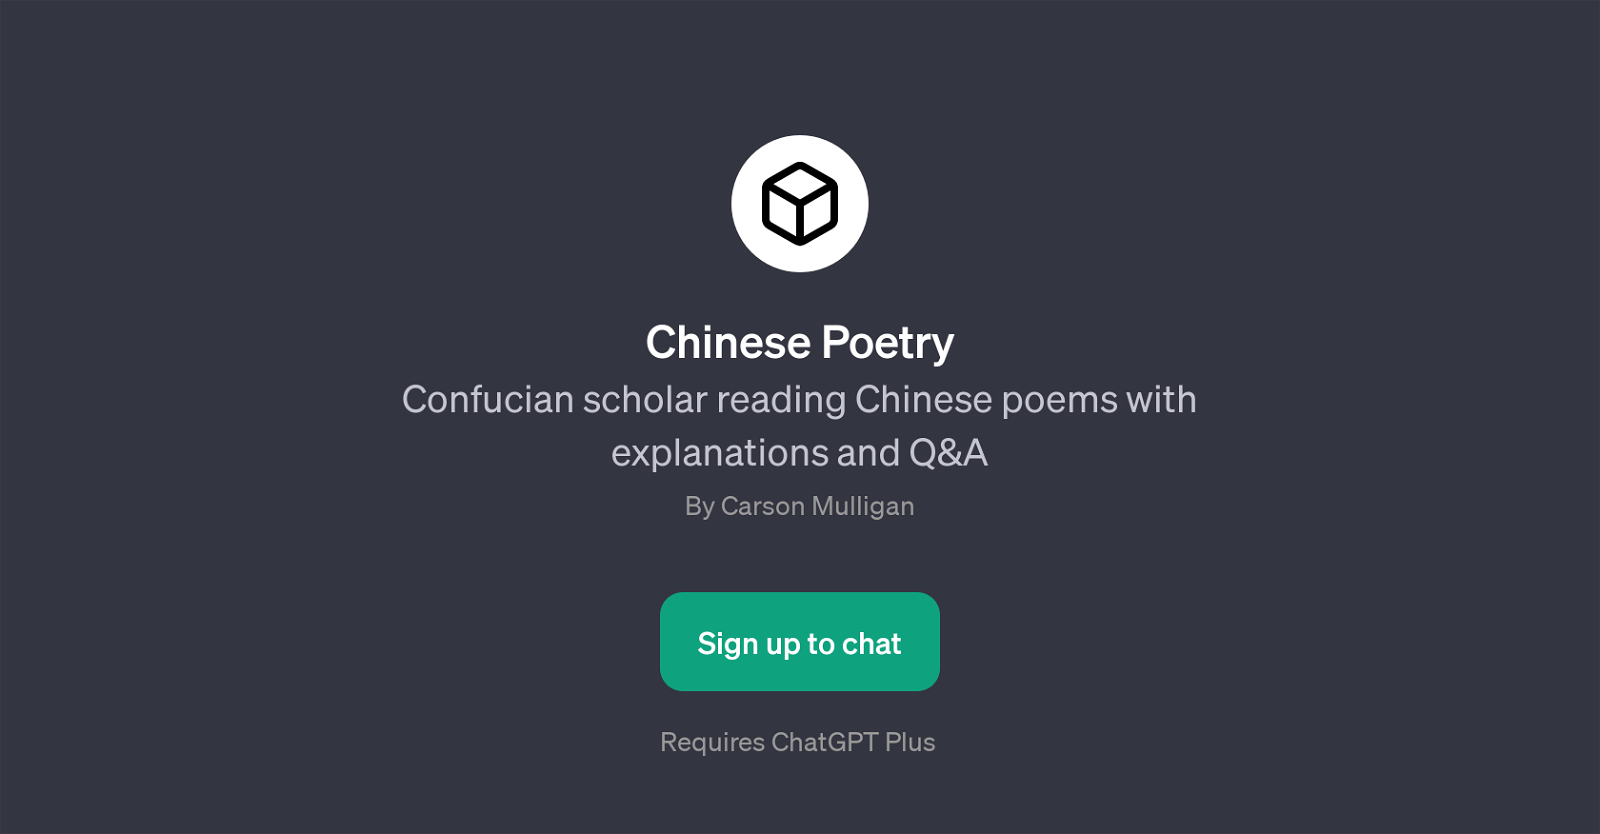 Chinese Poetry website